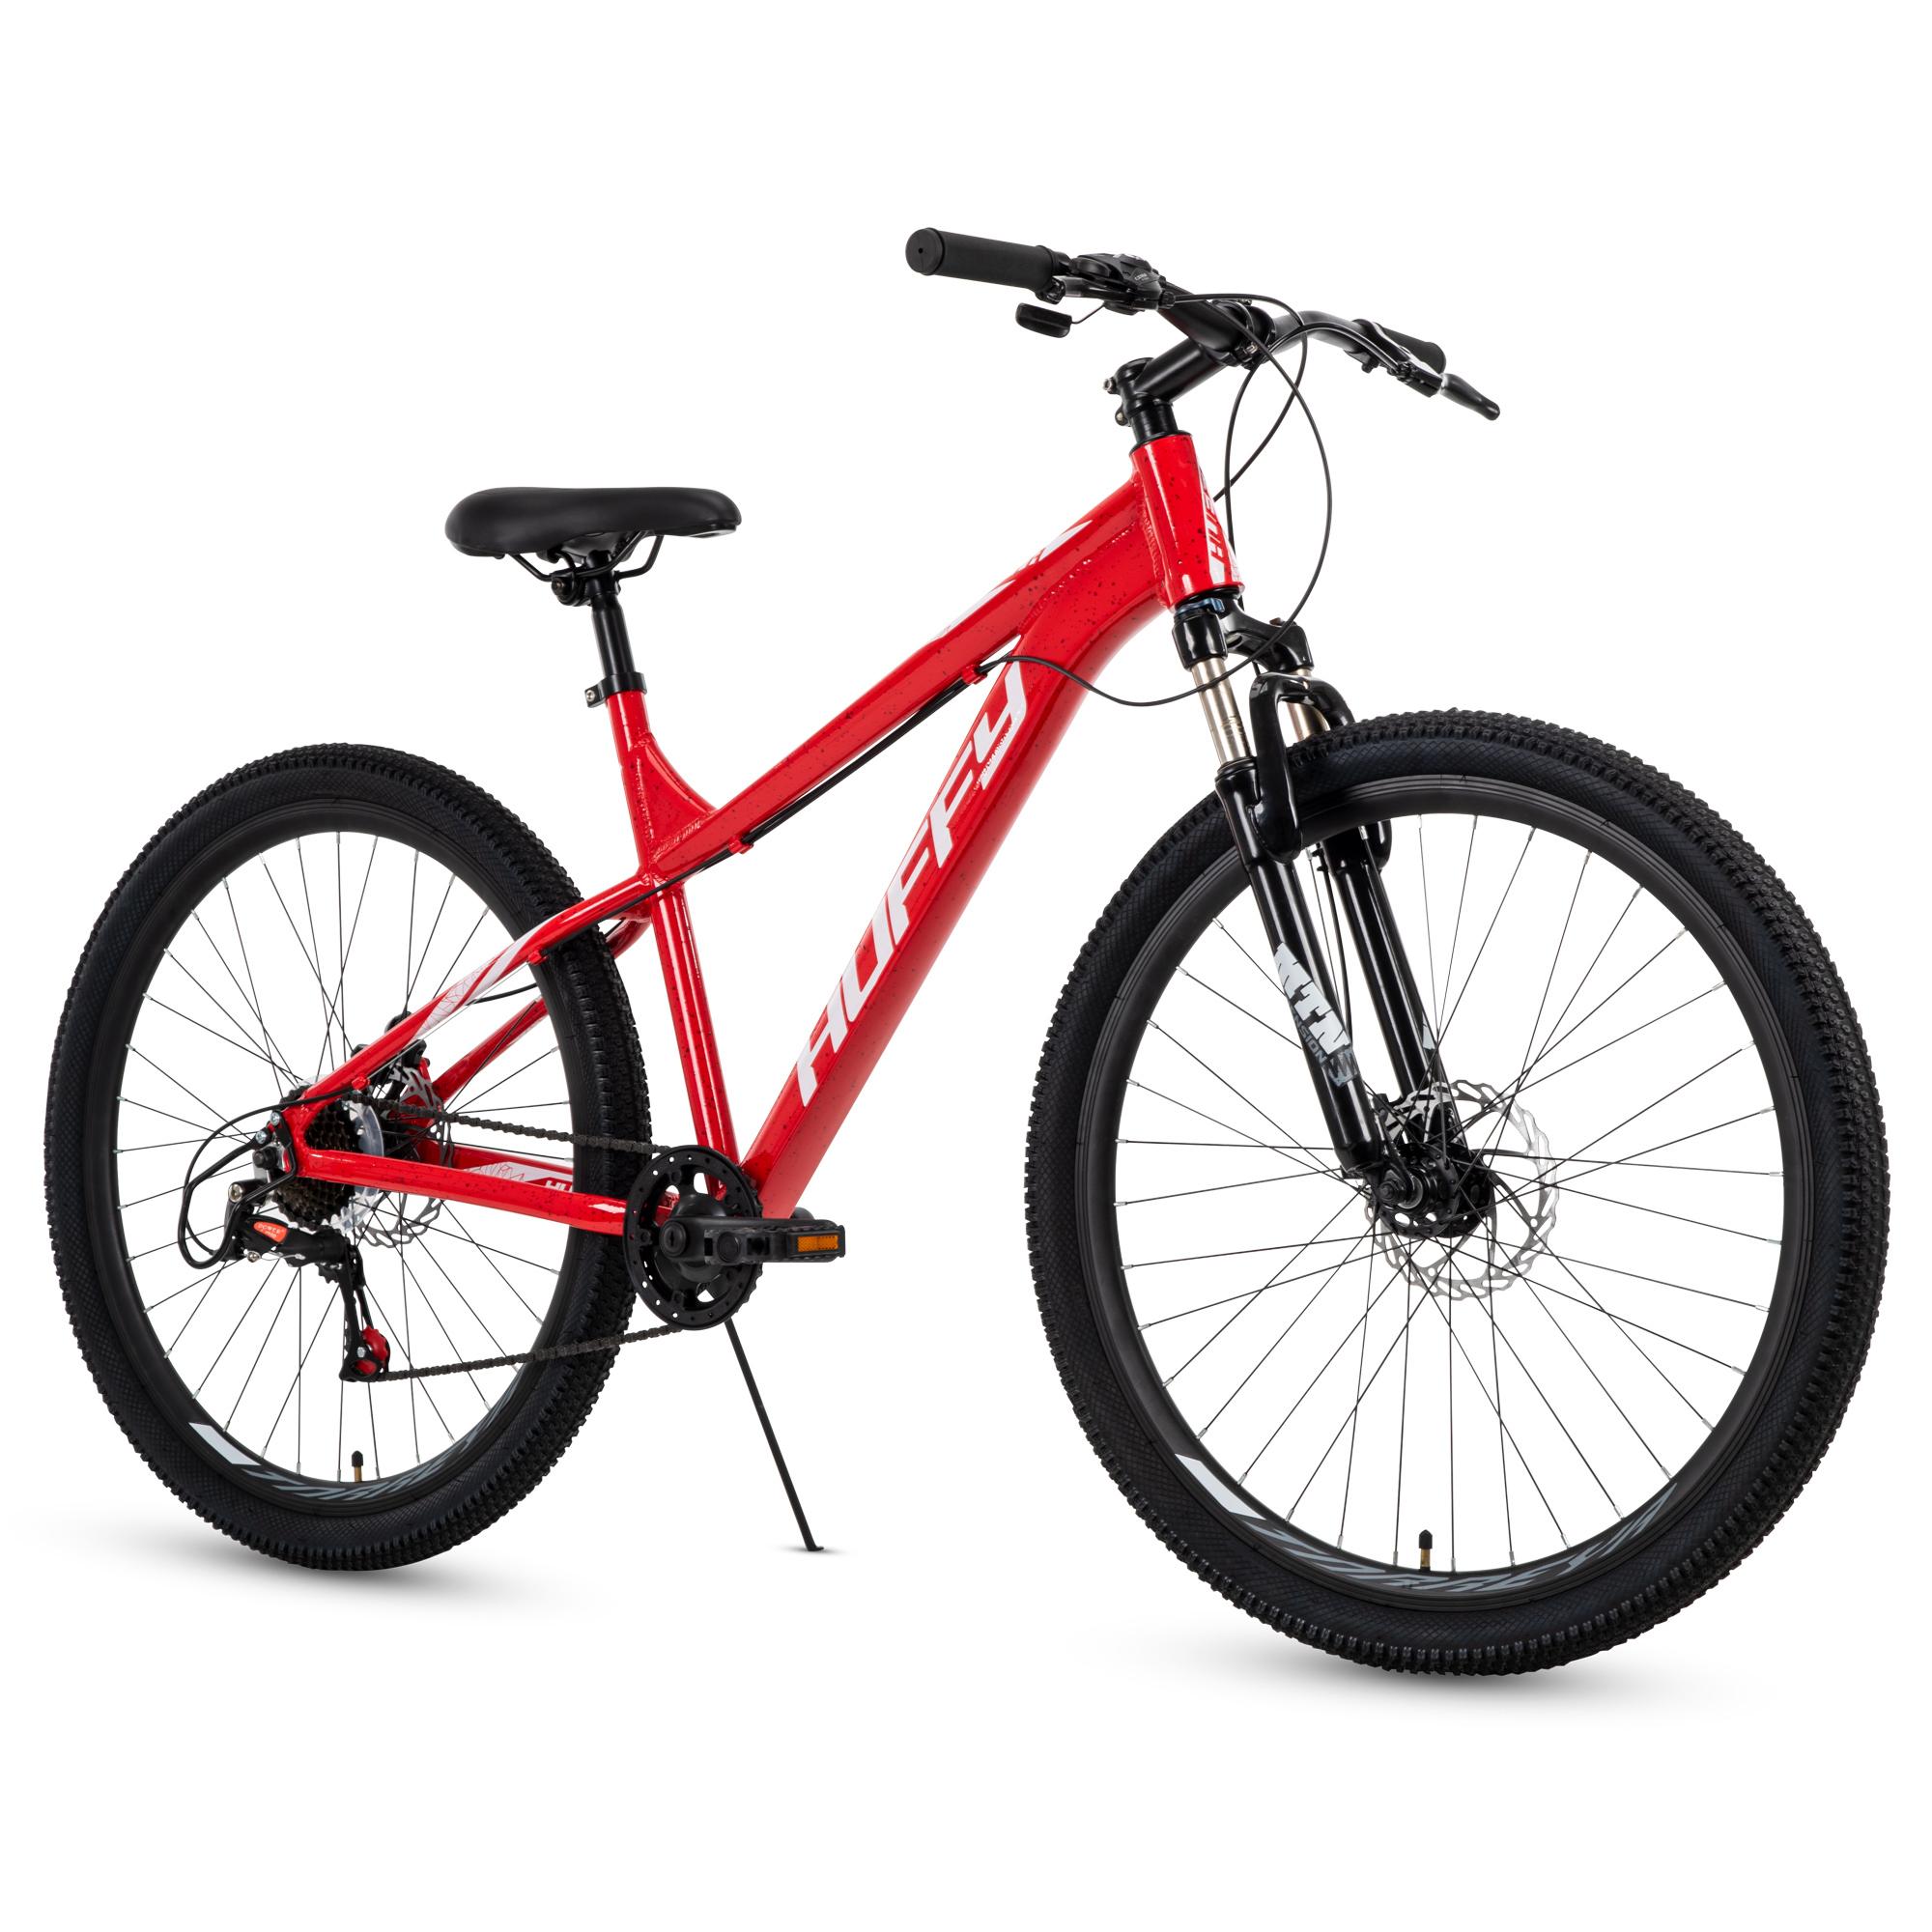 Huffy Torreya 27.5 In. 8-Speed Aluminum Mountain Bicycle for Men, Red - image 1 of 14